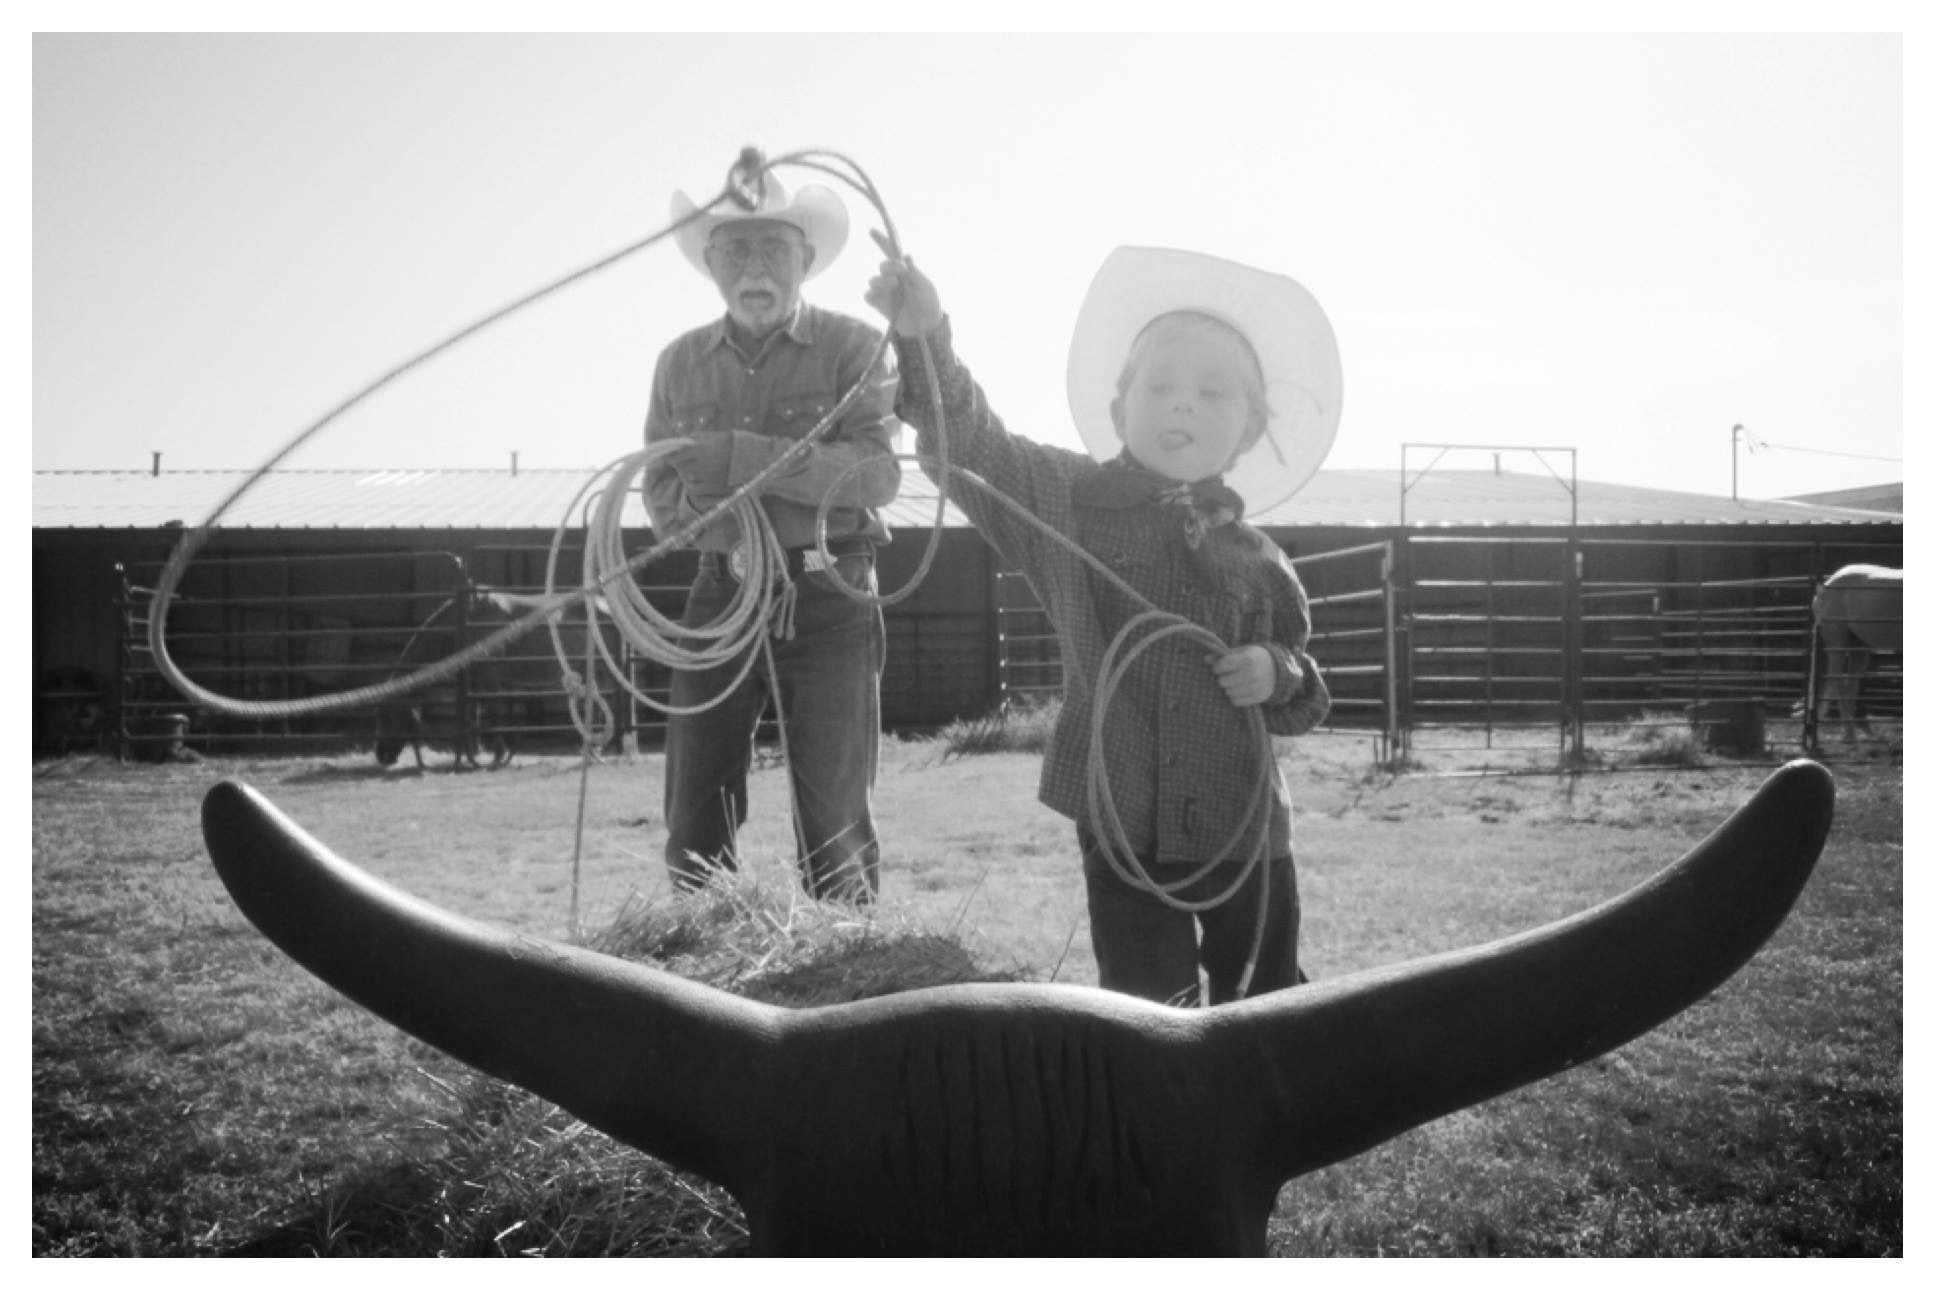 Roping lessons with Papa. (Photo courtesy of Steve Stevens)